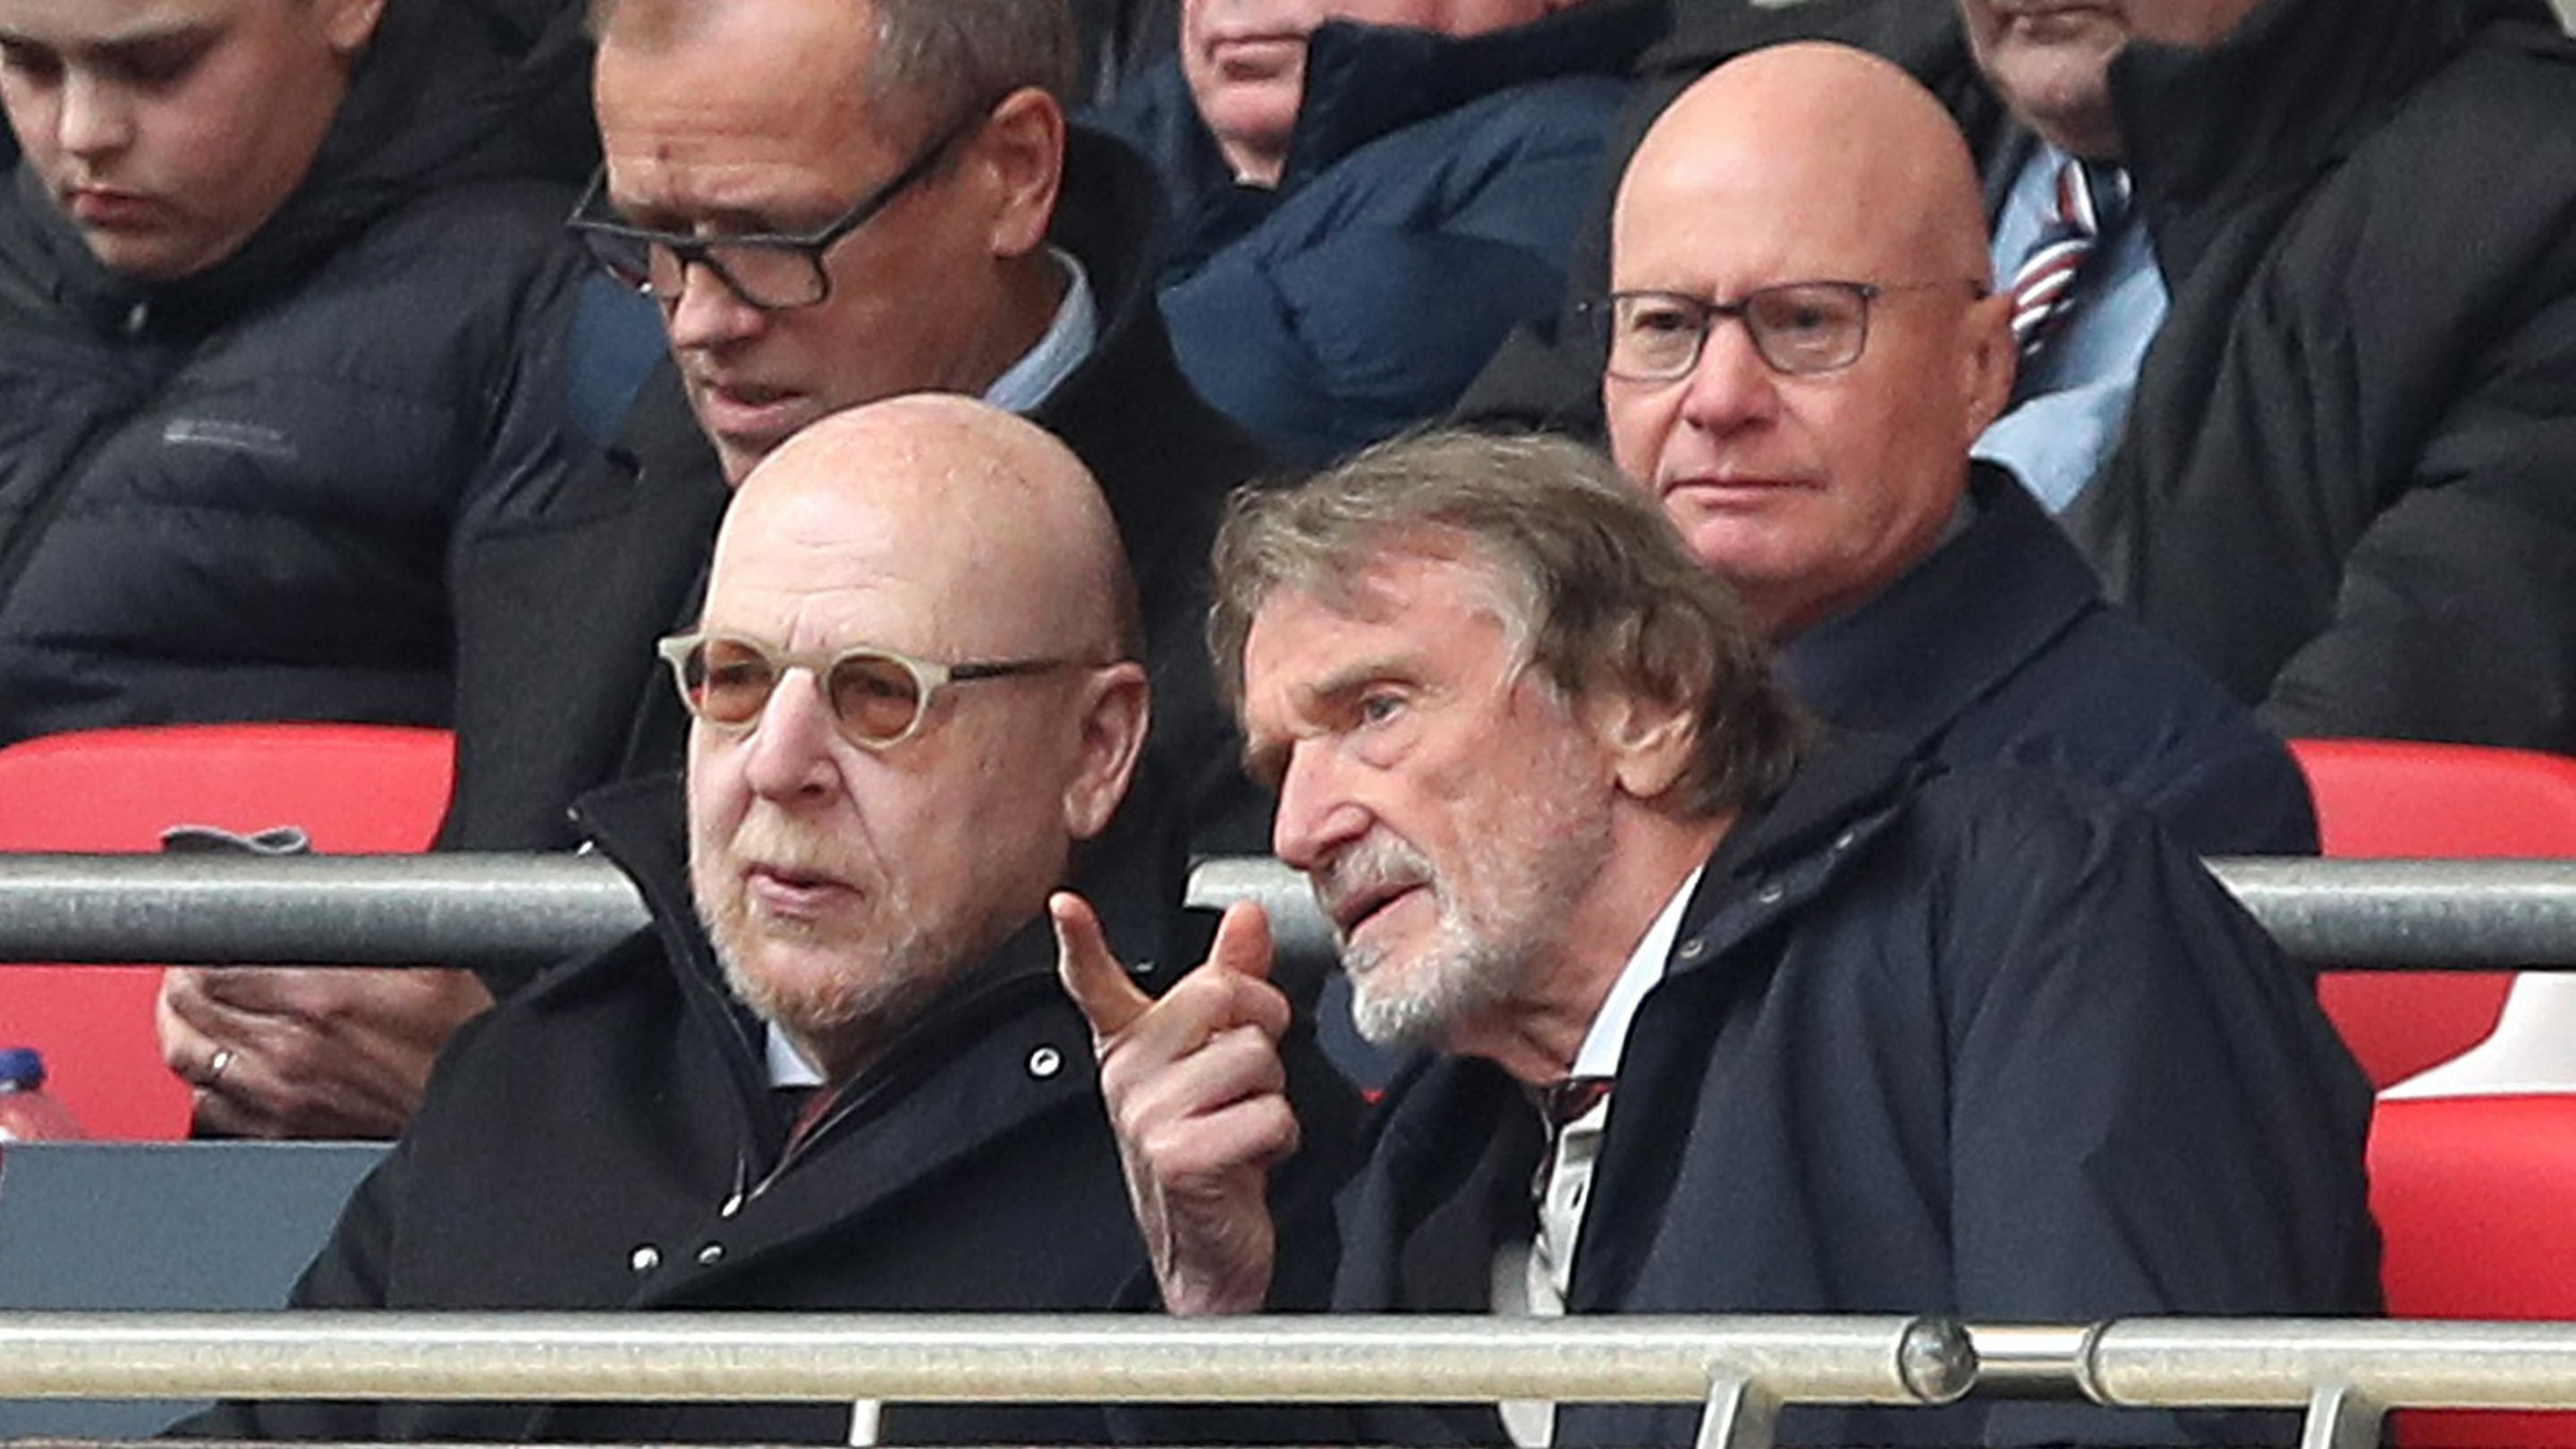 Sir Jim Ratcliffe's fury at Man Utd standards revealed in leaked emails